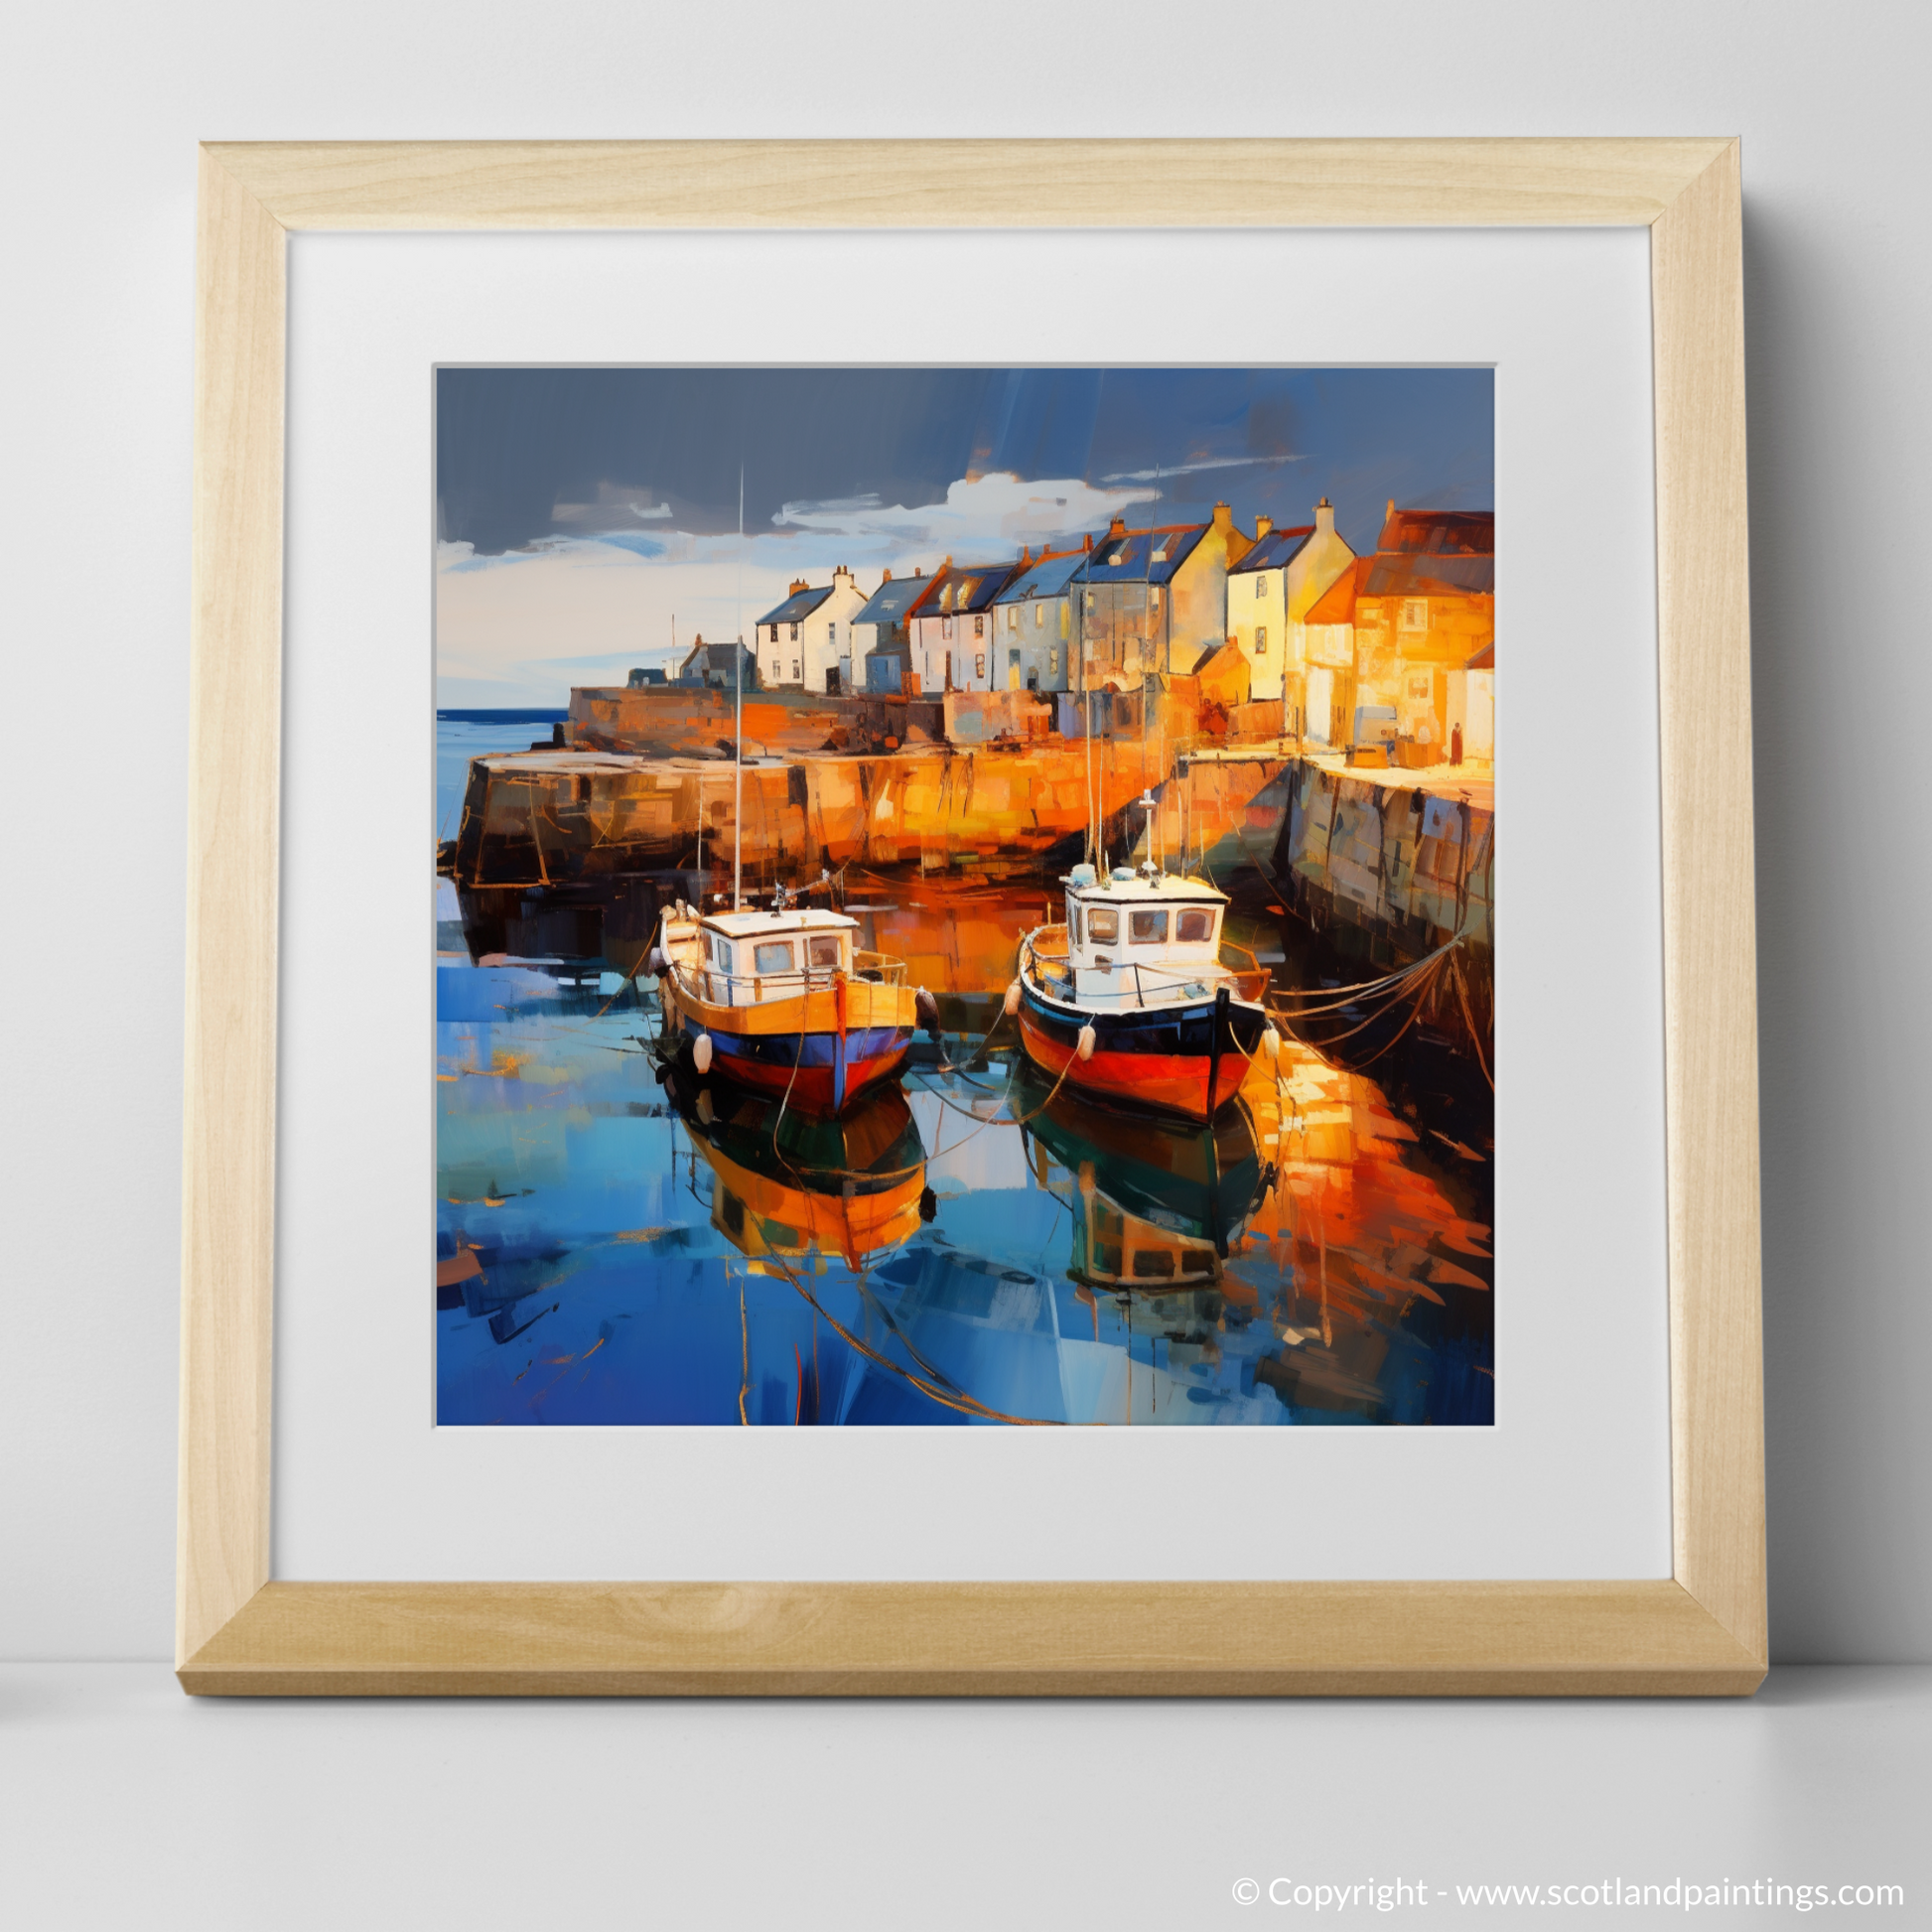 Art Print of Pittenweem Harbour at dusk with a natural frame